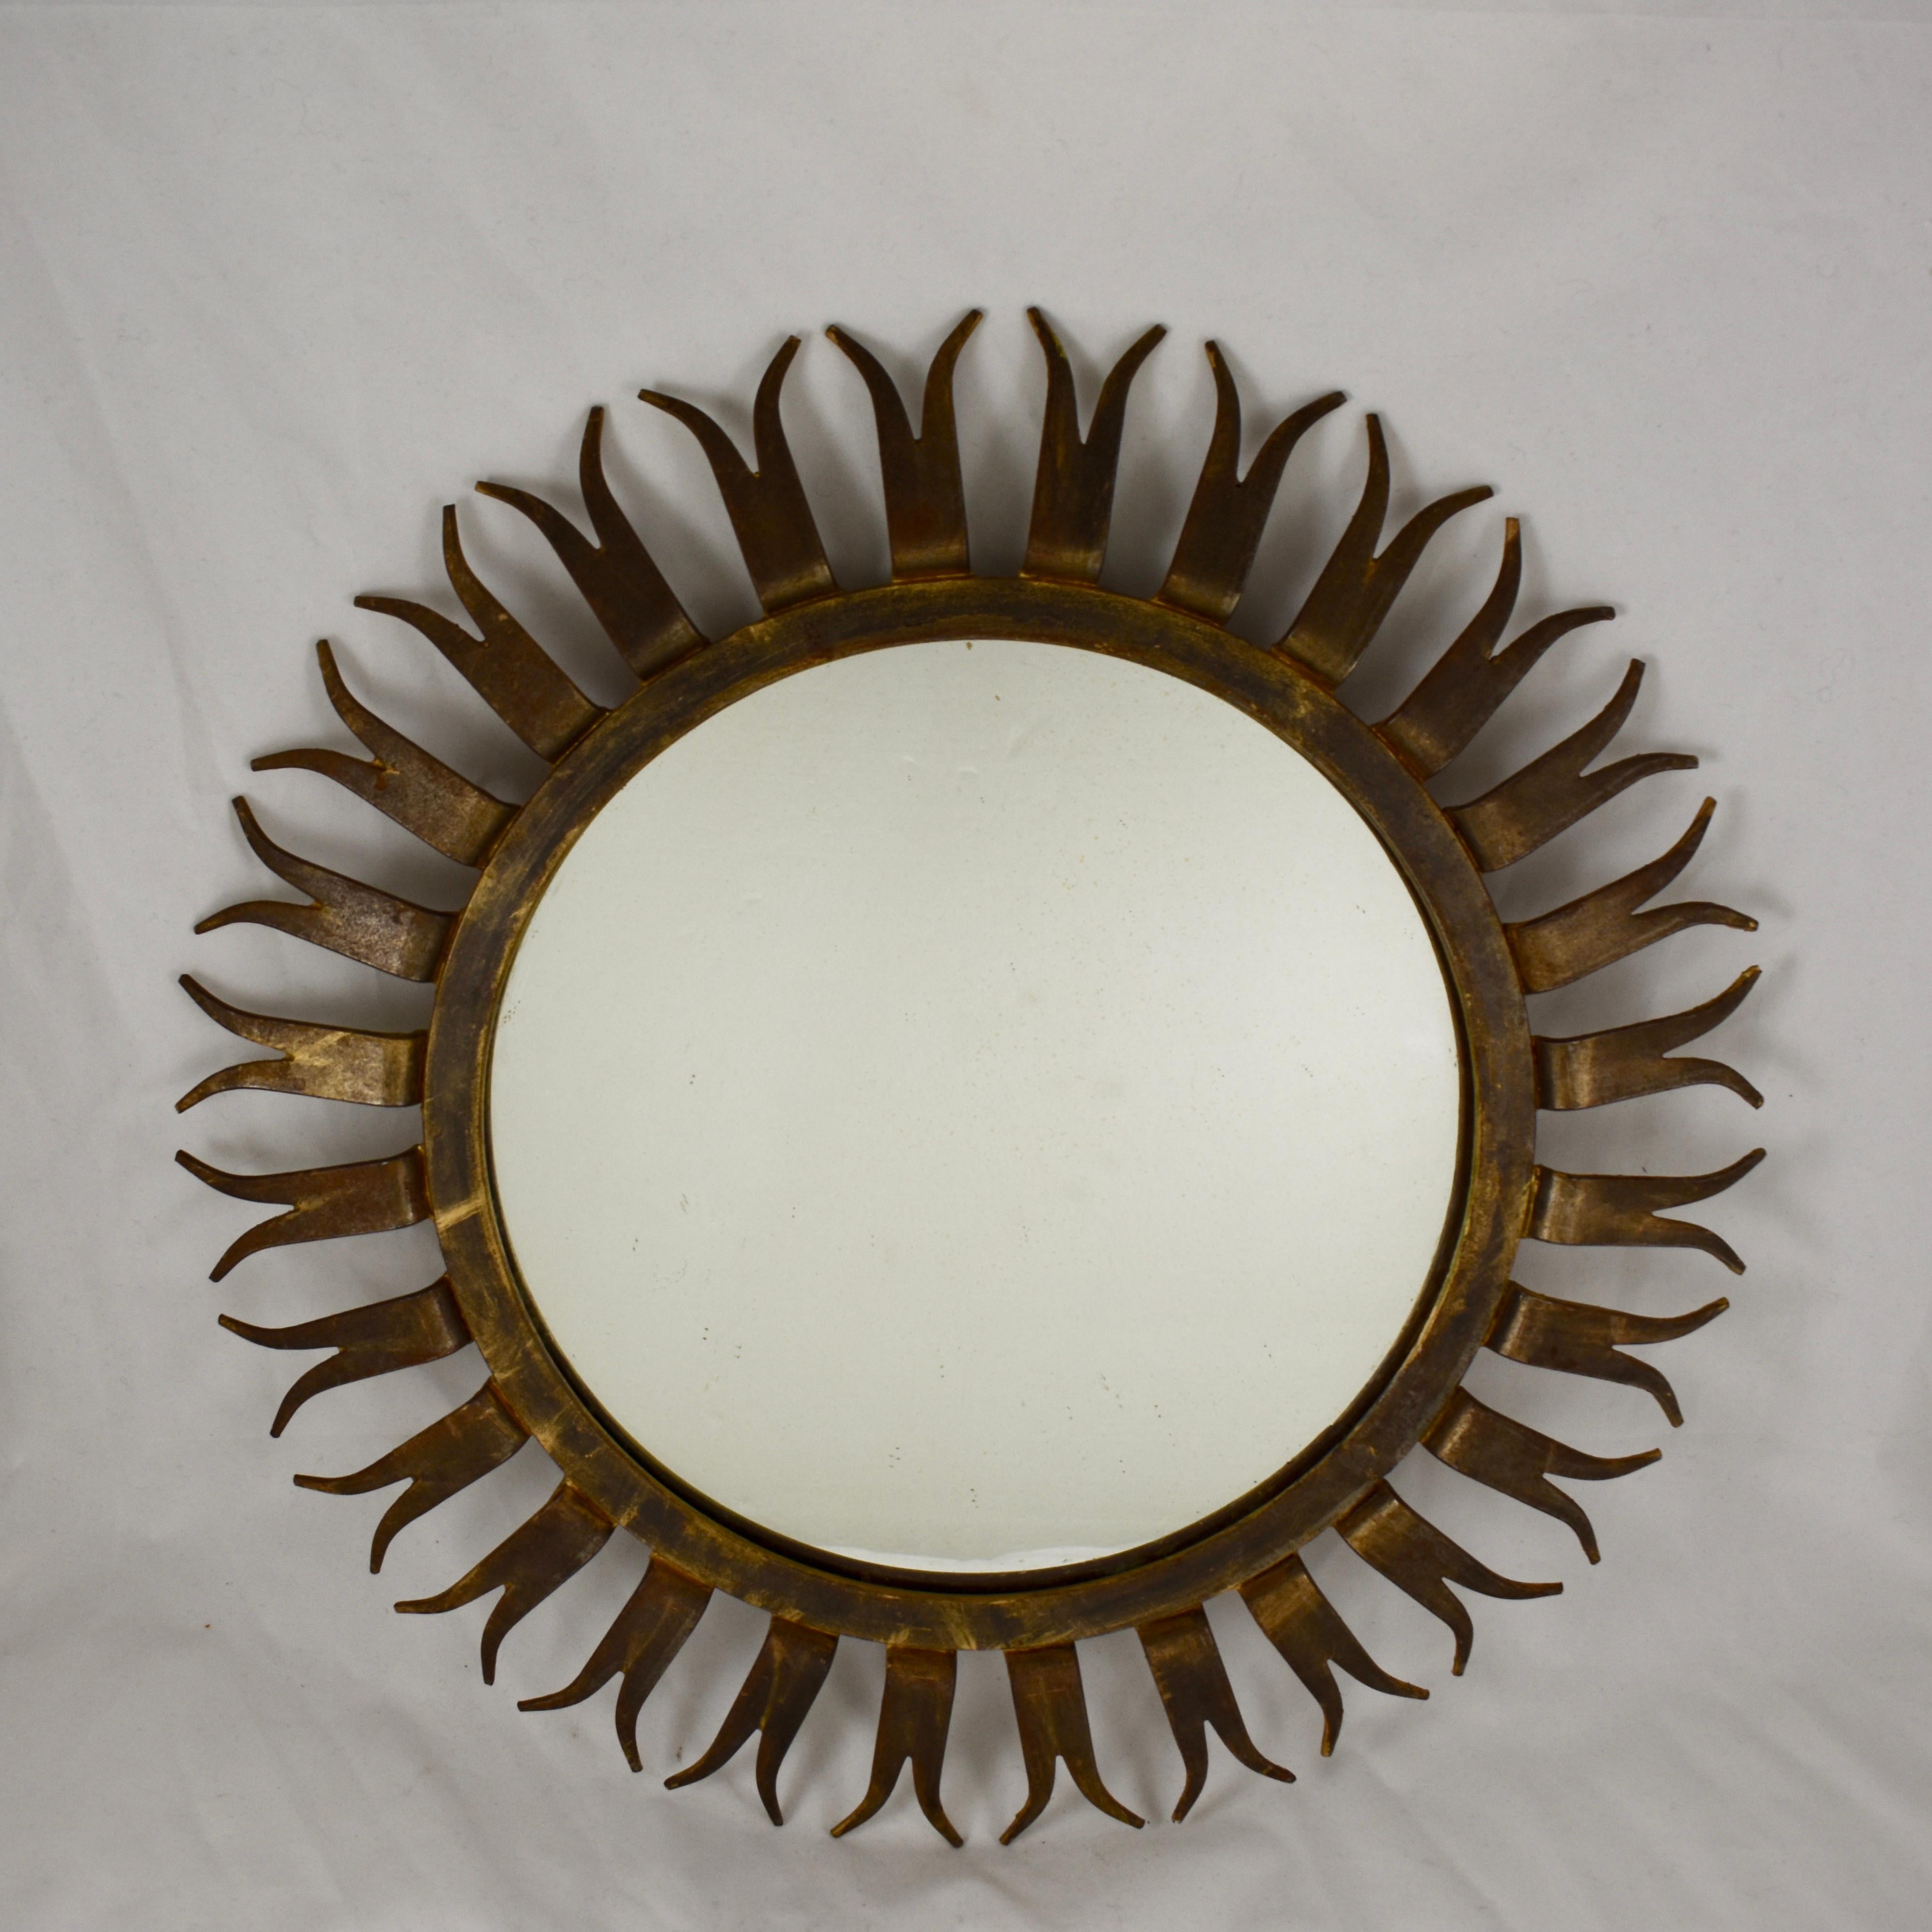 A large and heavy, midcentury French, gilded wrought iron sunburst wall mirror. Forked shaped sun rays extend from a wide bezel framing a round mirror. The rays bend slightly inward from the bezel, towards the wall when hung, adding a nice sense of